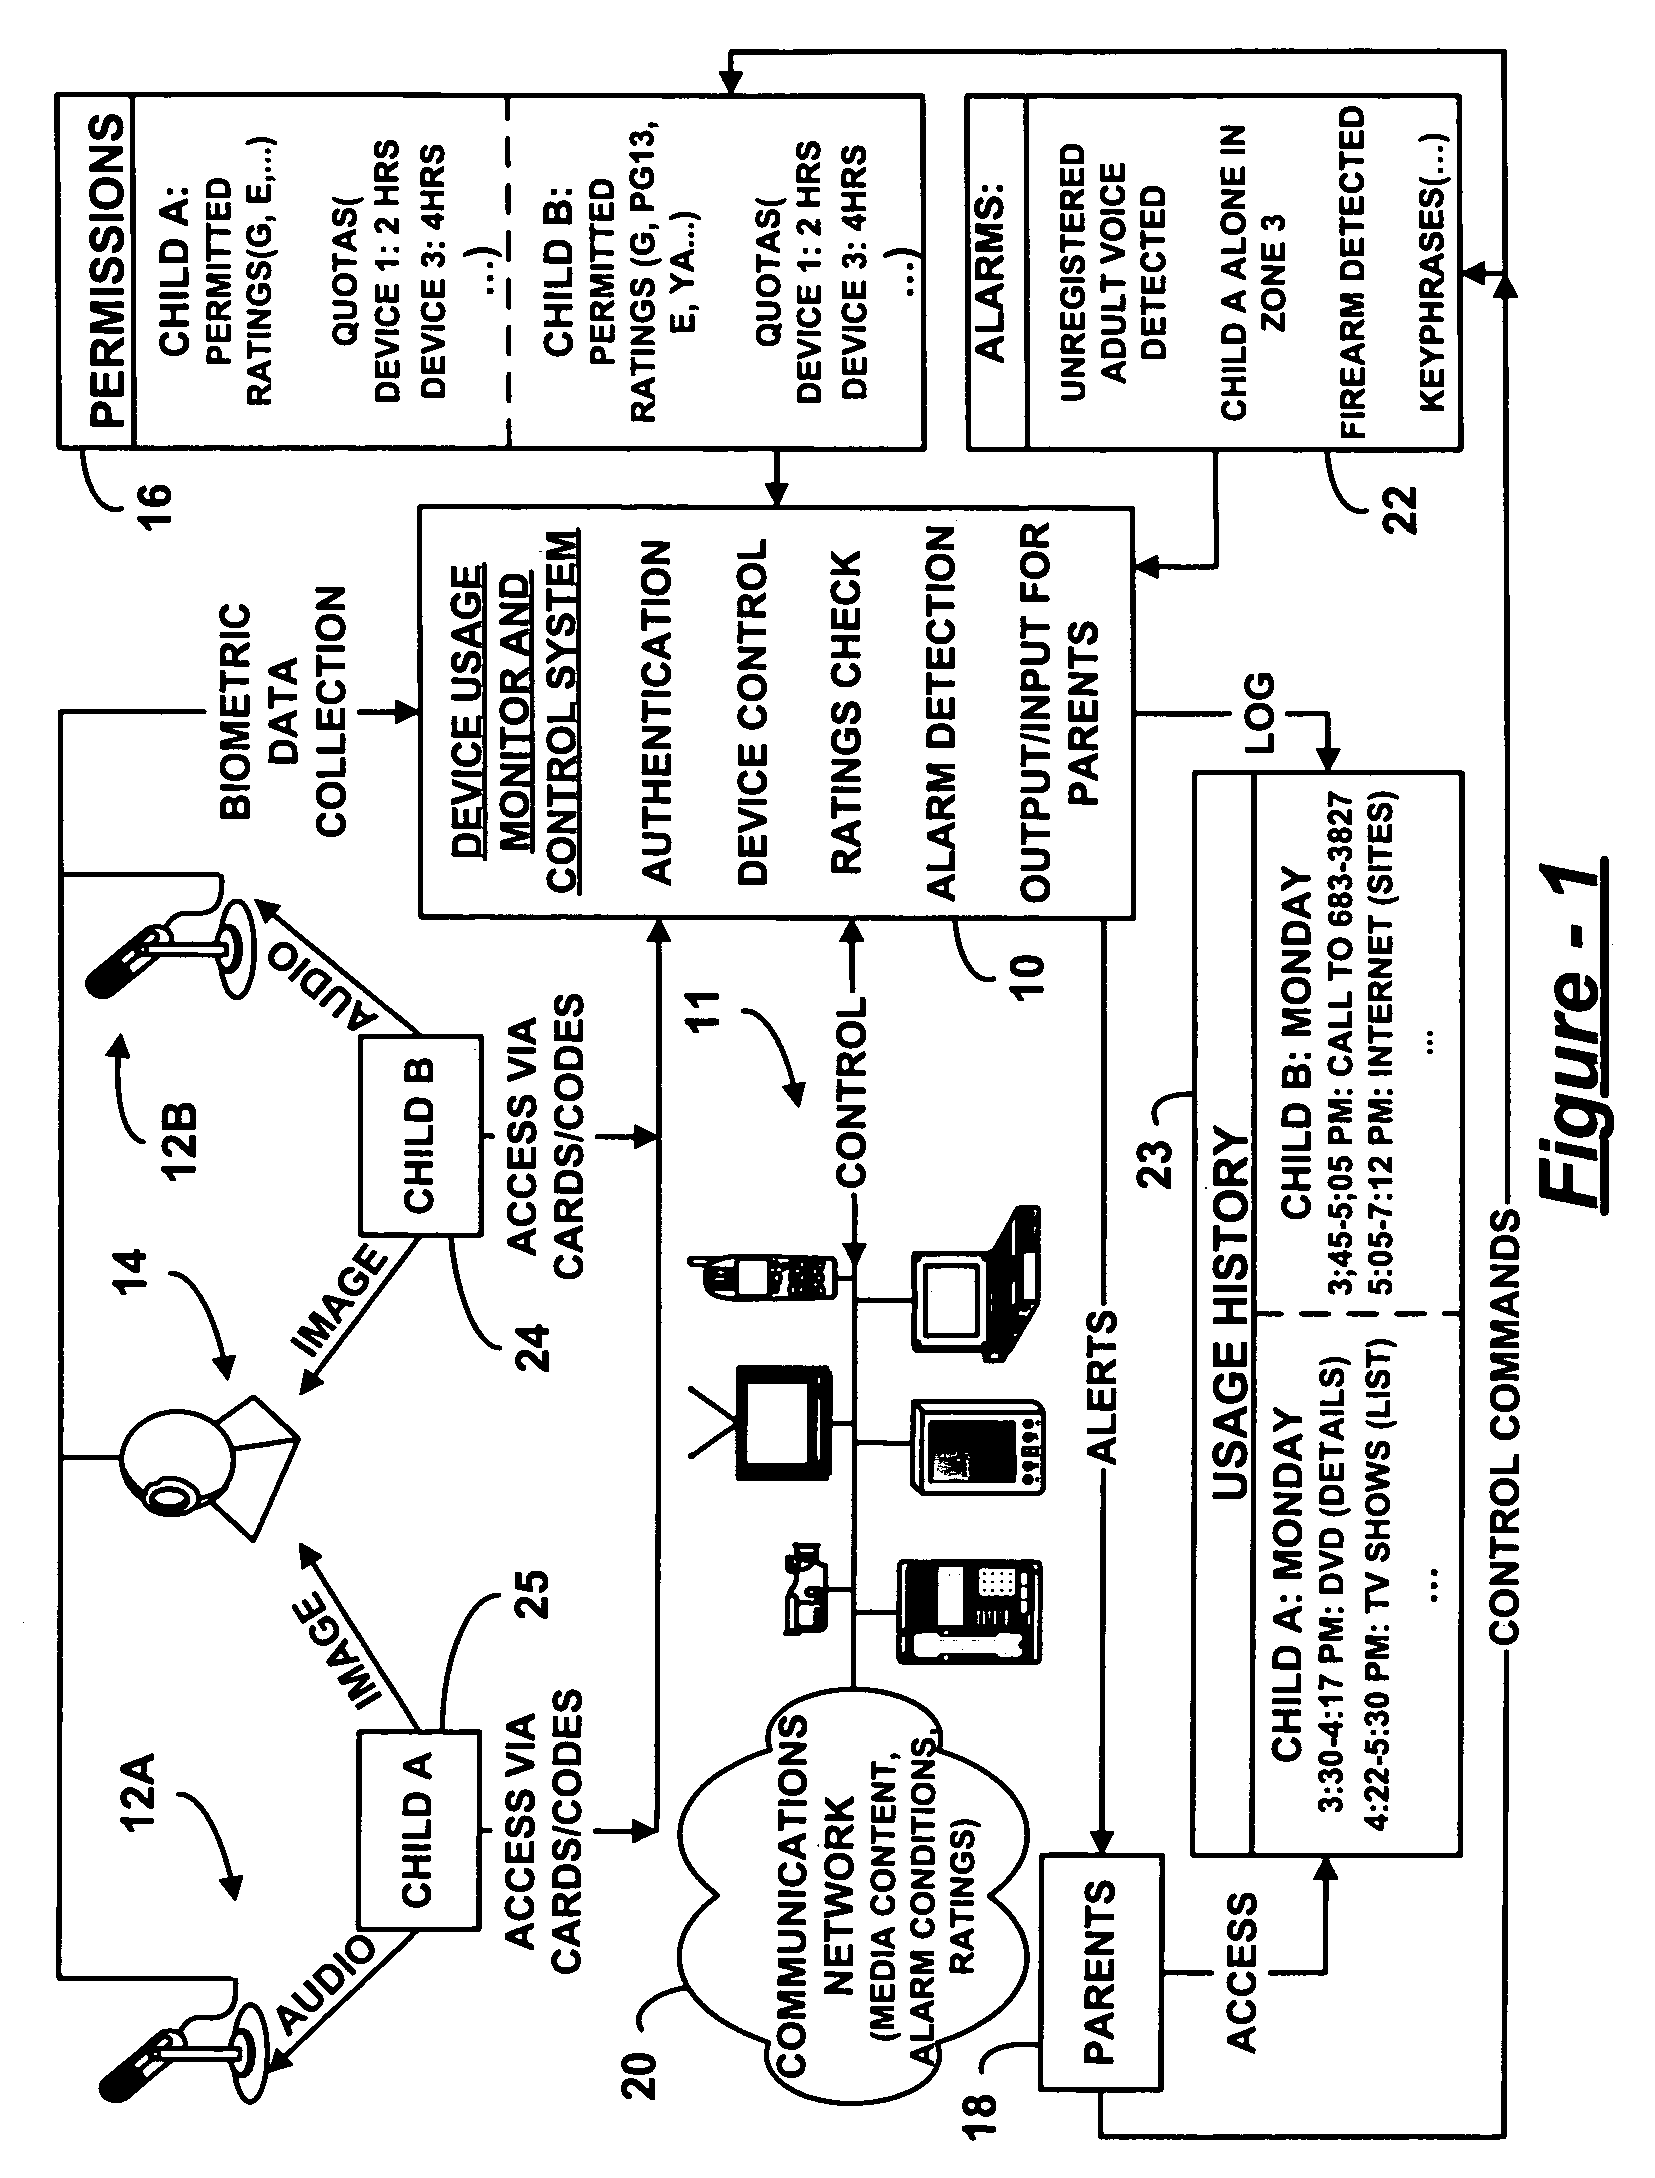 Method and parental control and monitoring of usage of devices connected to home network